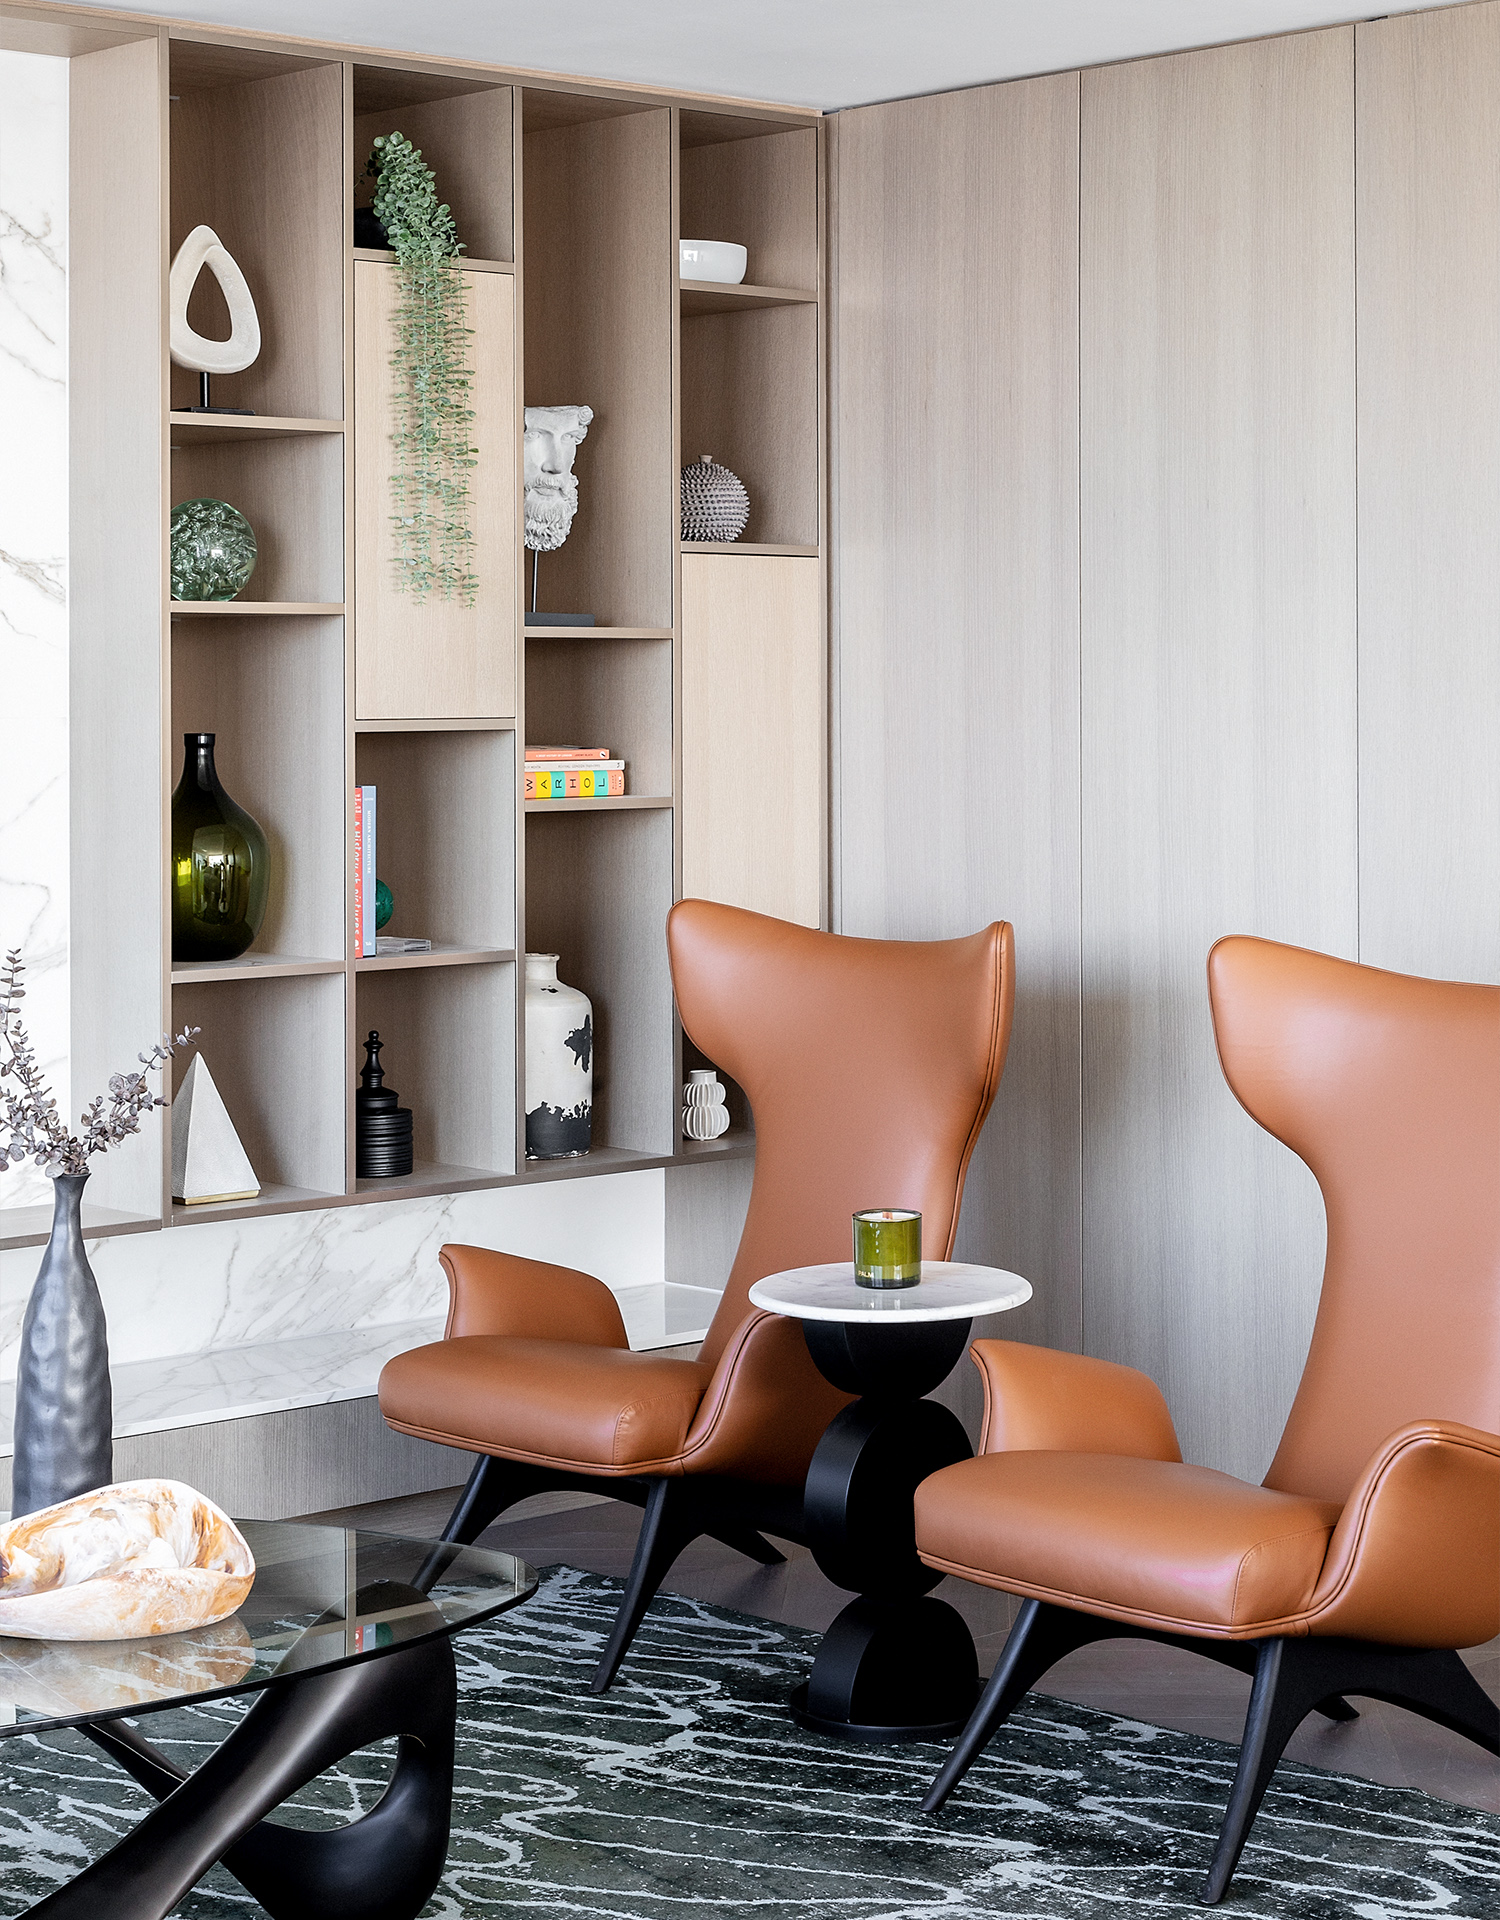 One St. John's Wood | Sleek leather chairs bring elegance | Angel O'Donnell